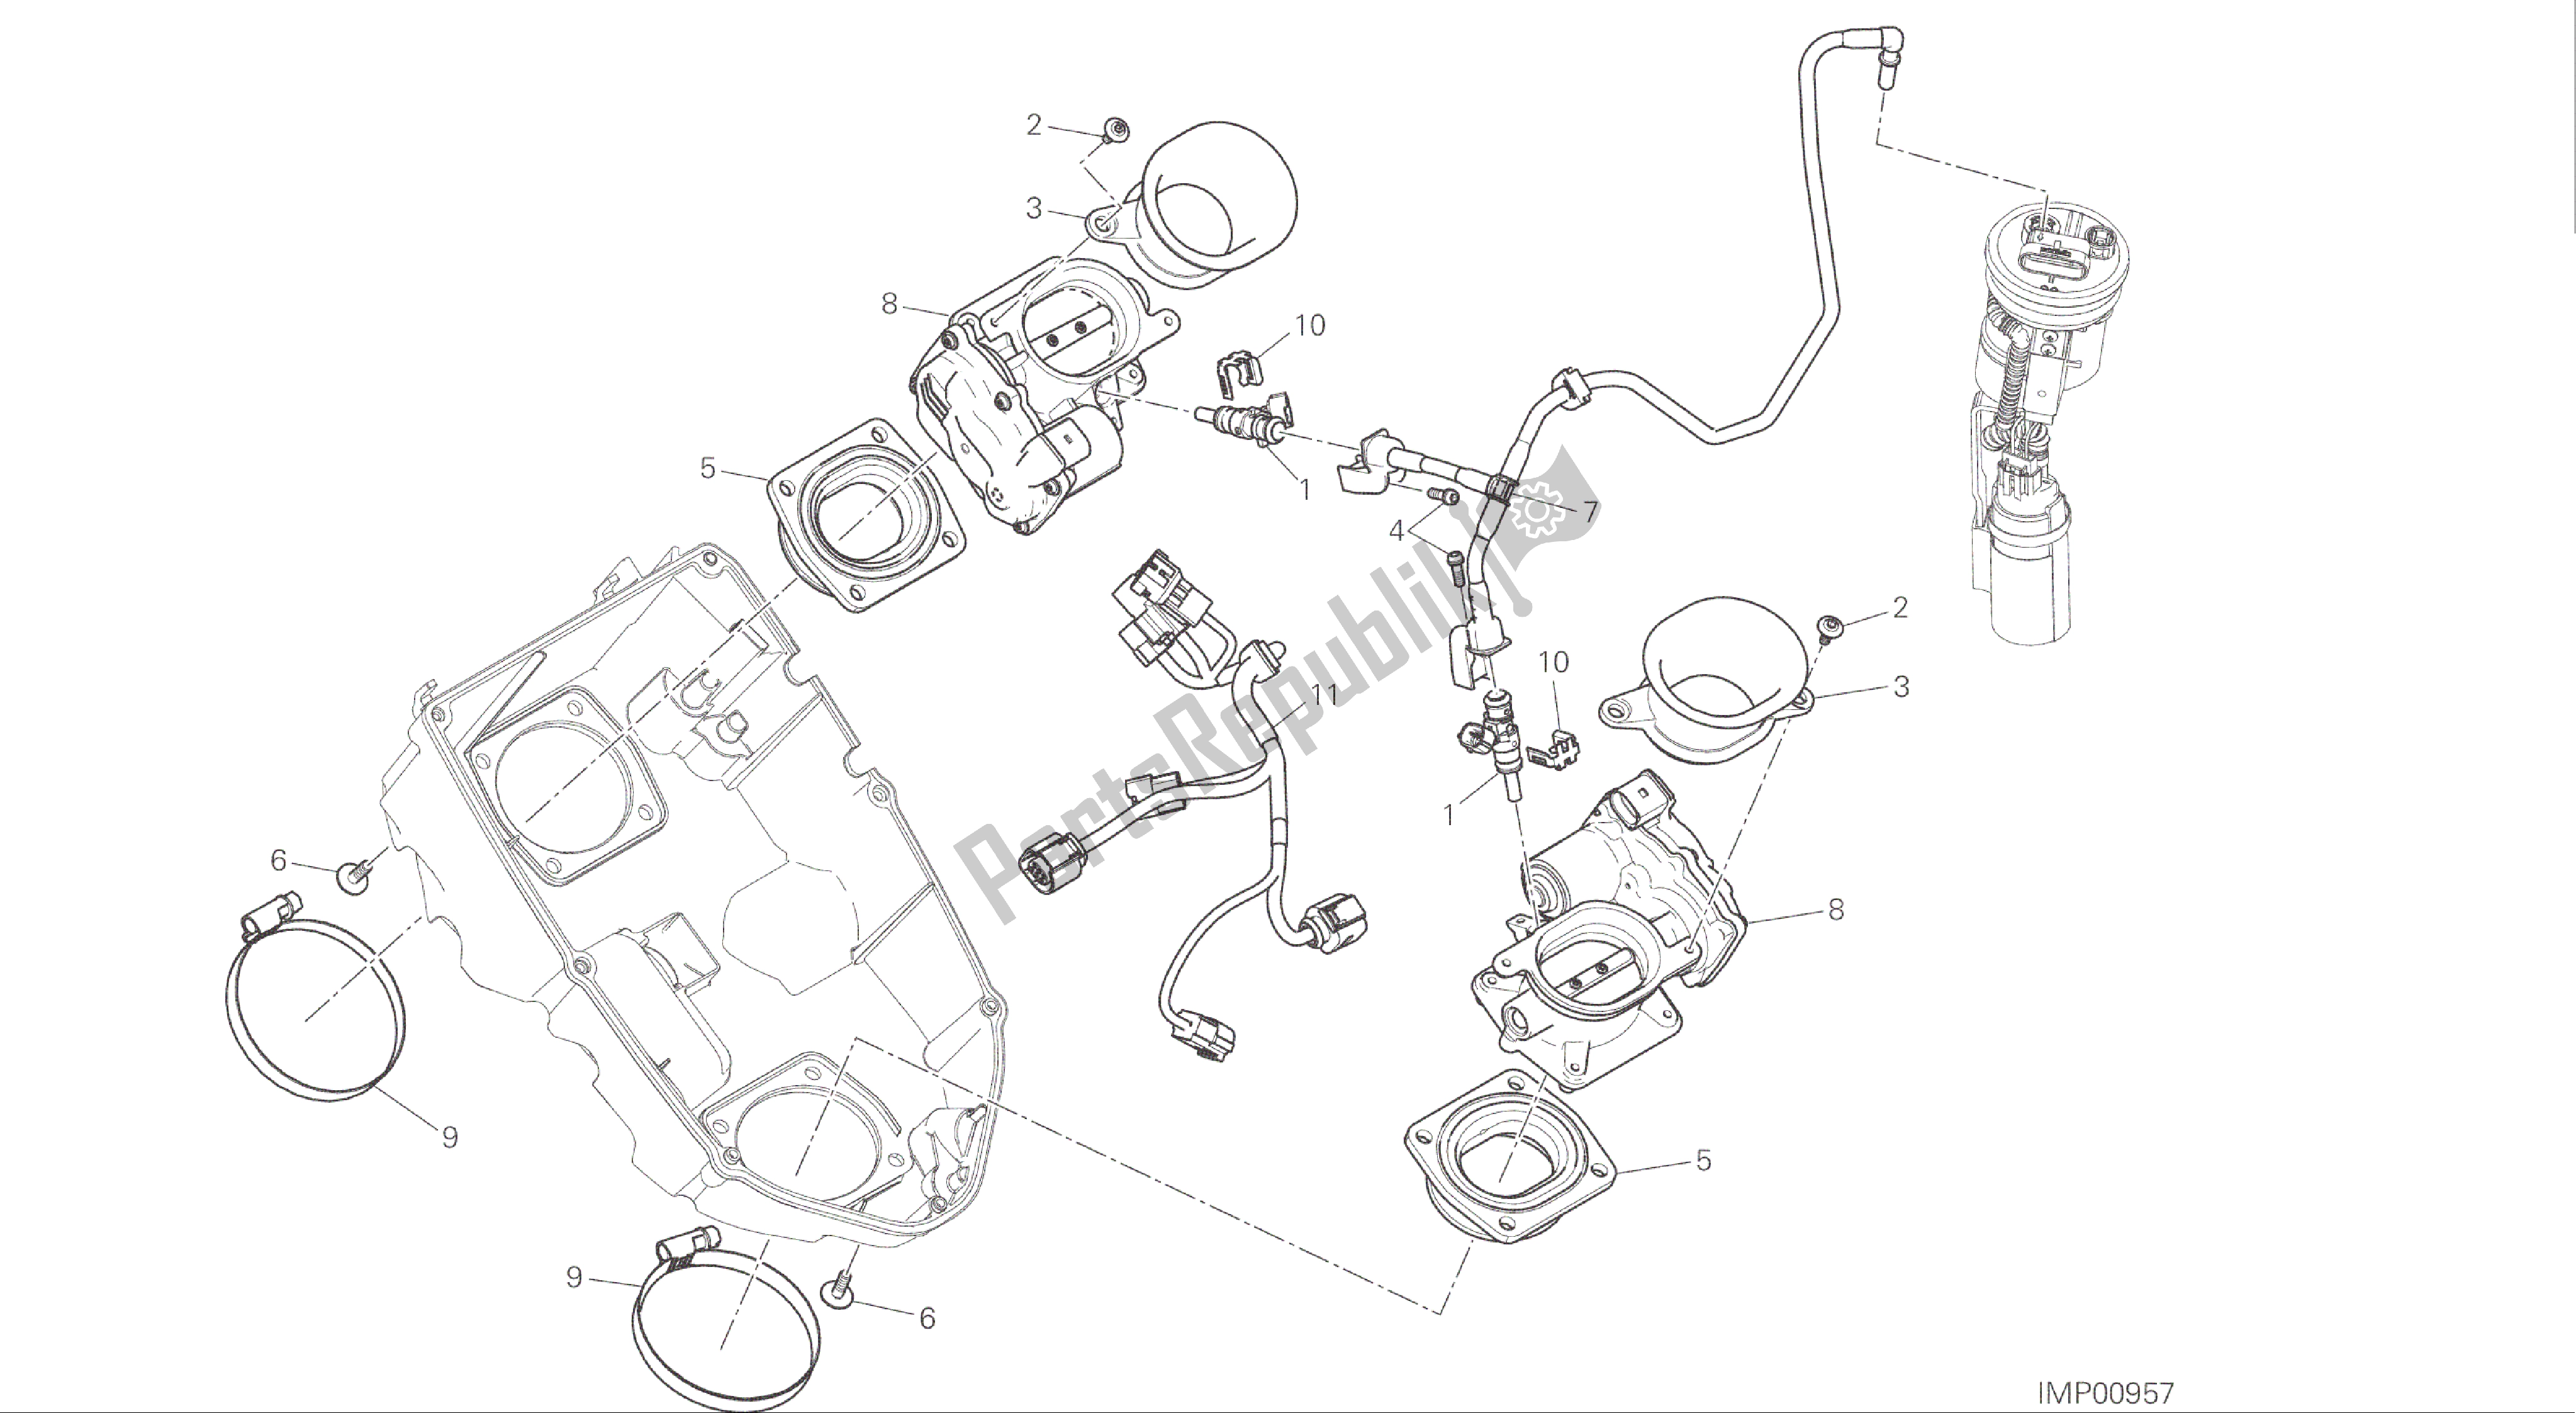 All parts for the Drawing 017 - Throttle Body [mod:ms1200s]group Engine of the Ducati Multistrada S ABS 1200 2016